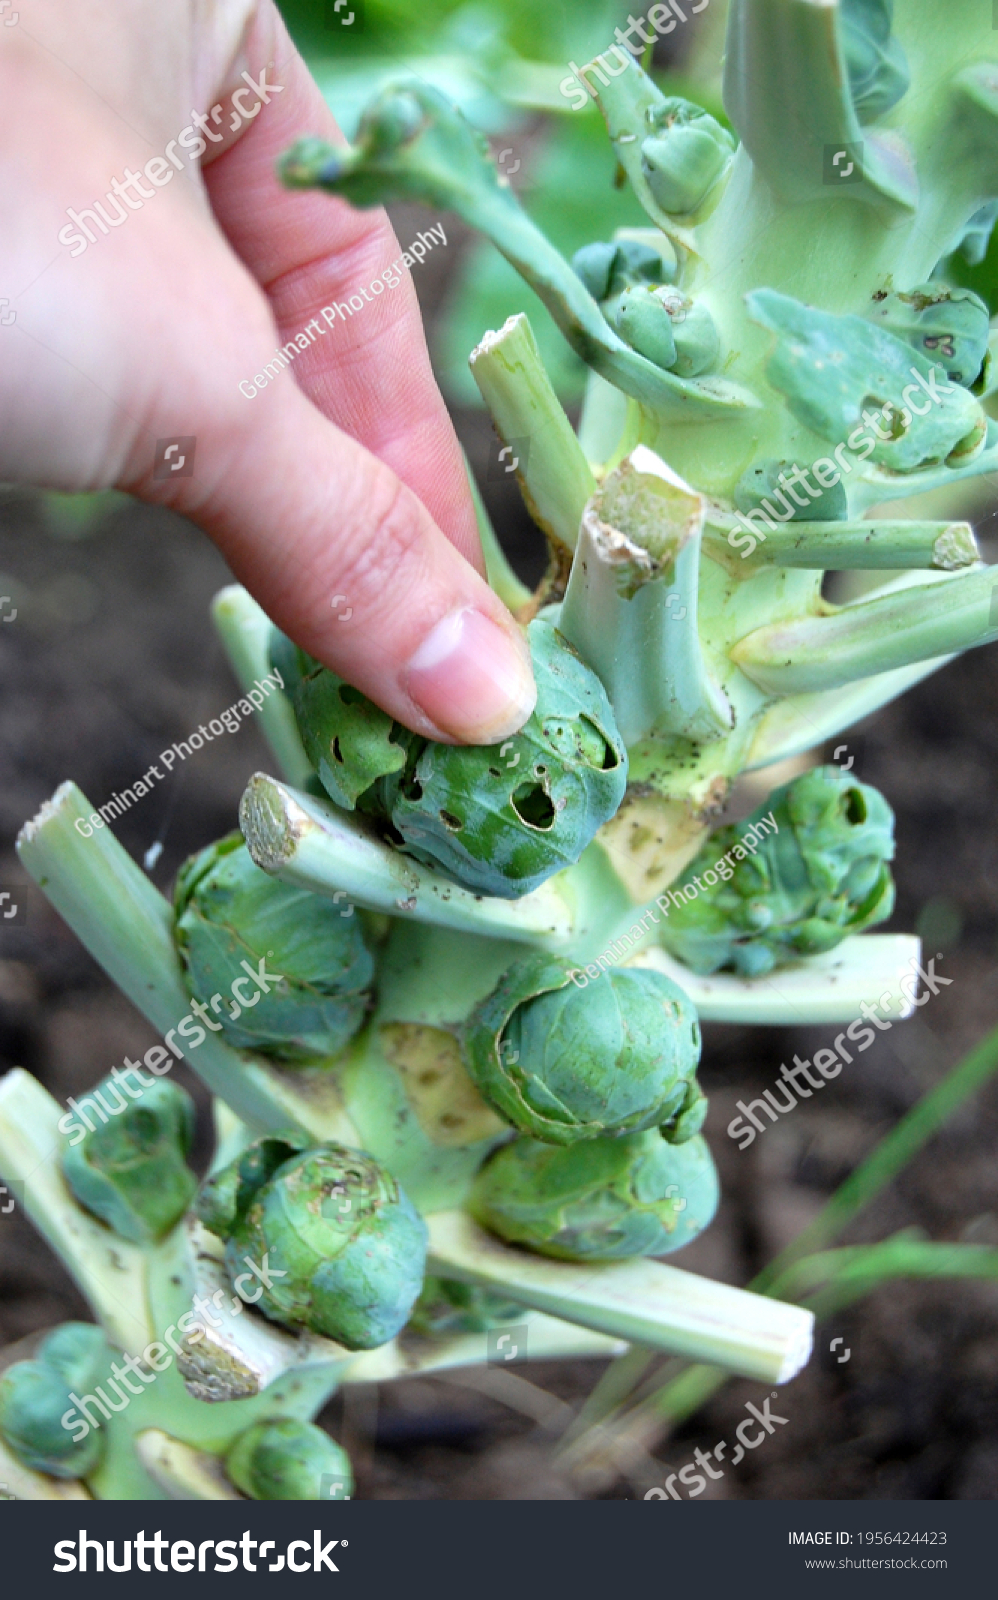 Brussels sprouts readying for harvesting outdoors organic garden. #1956424423